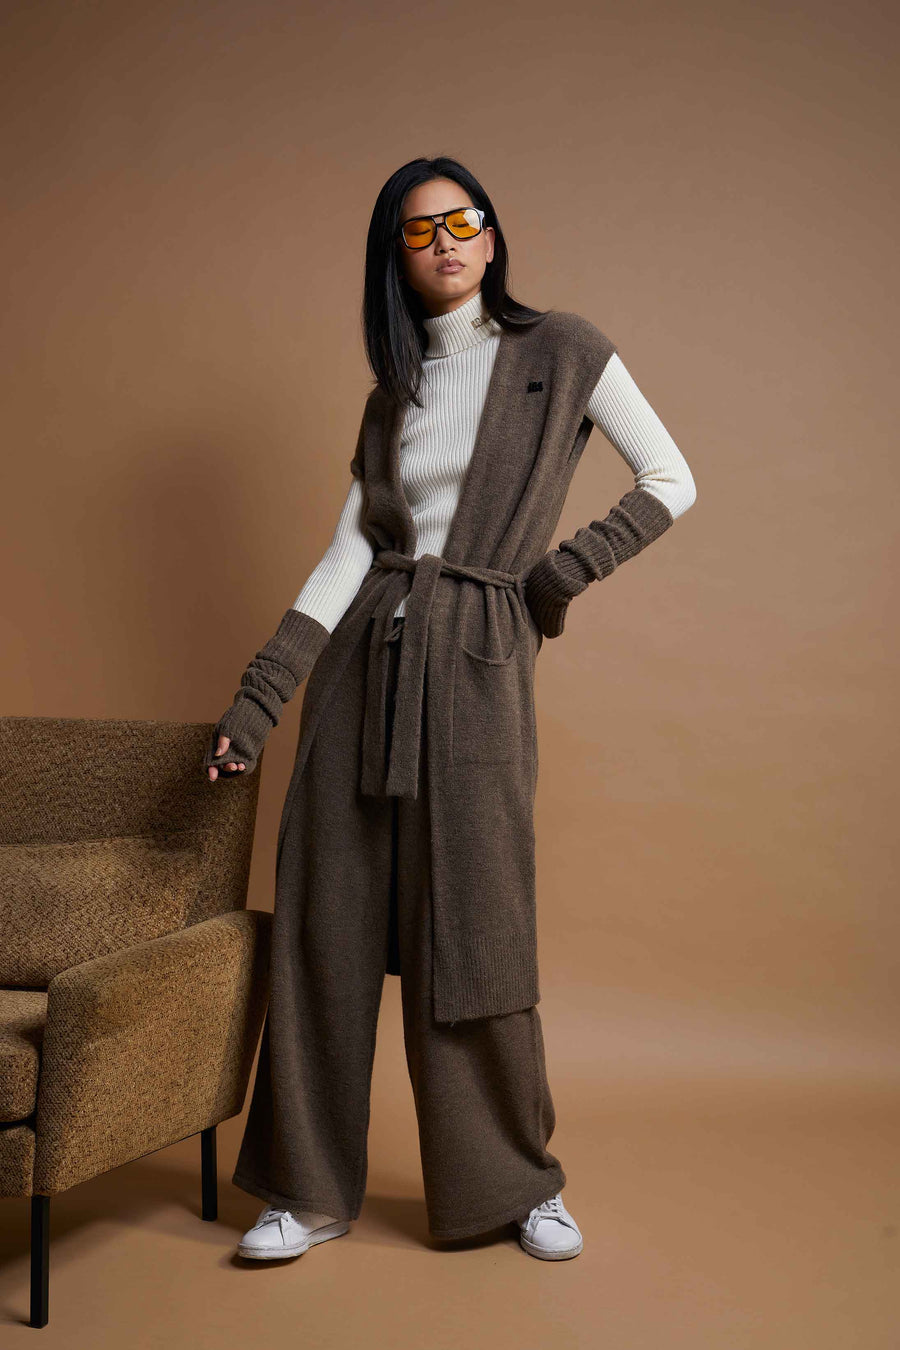 PALAZZO BROWN KNITTED TROUSERS